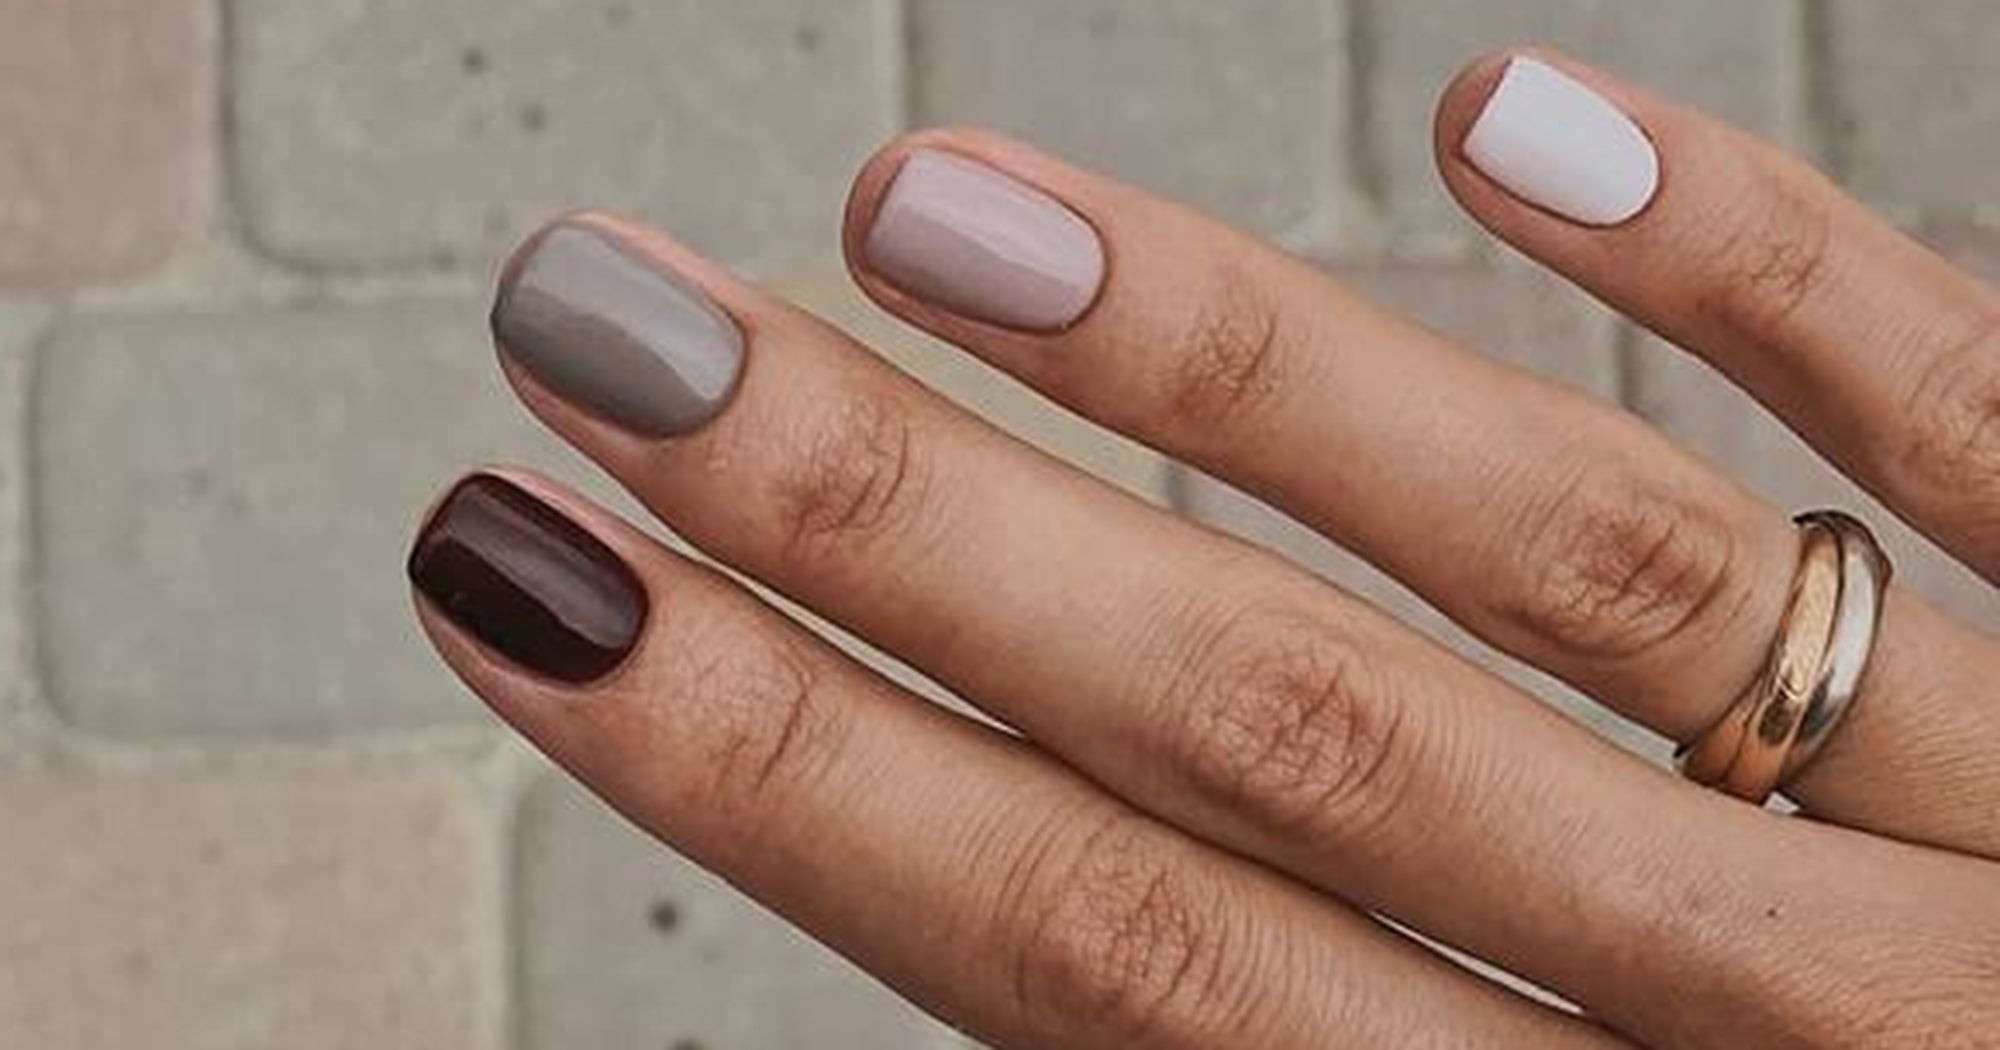 Popular Nail Colors Fall 2020
 Best Fall Nail Polish Colors For A Trendy Manicure 2019